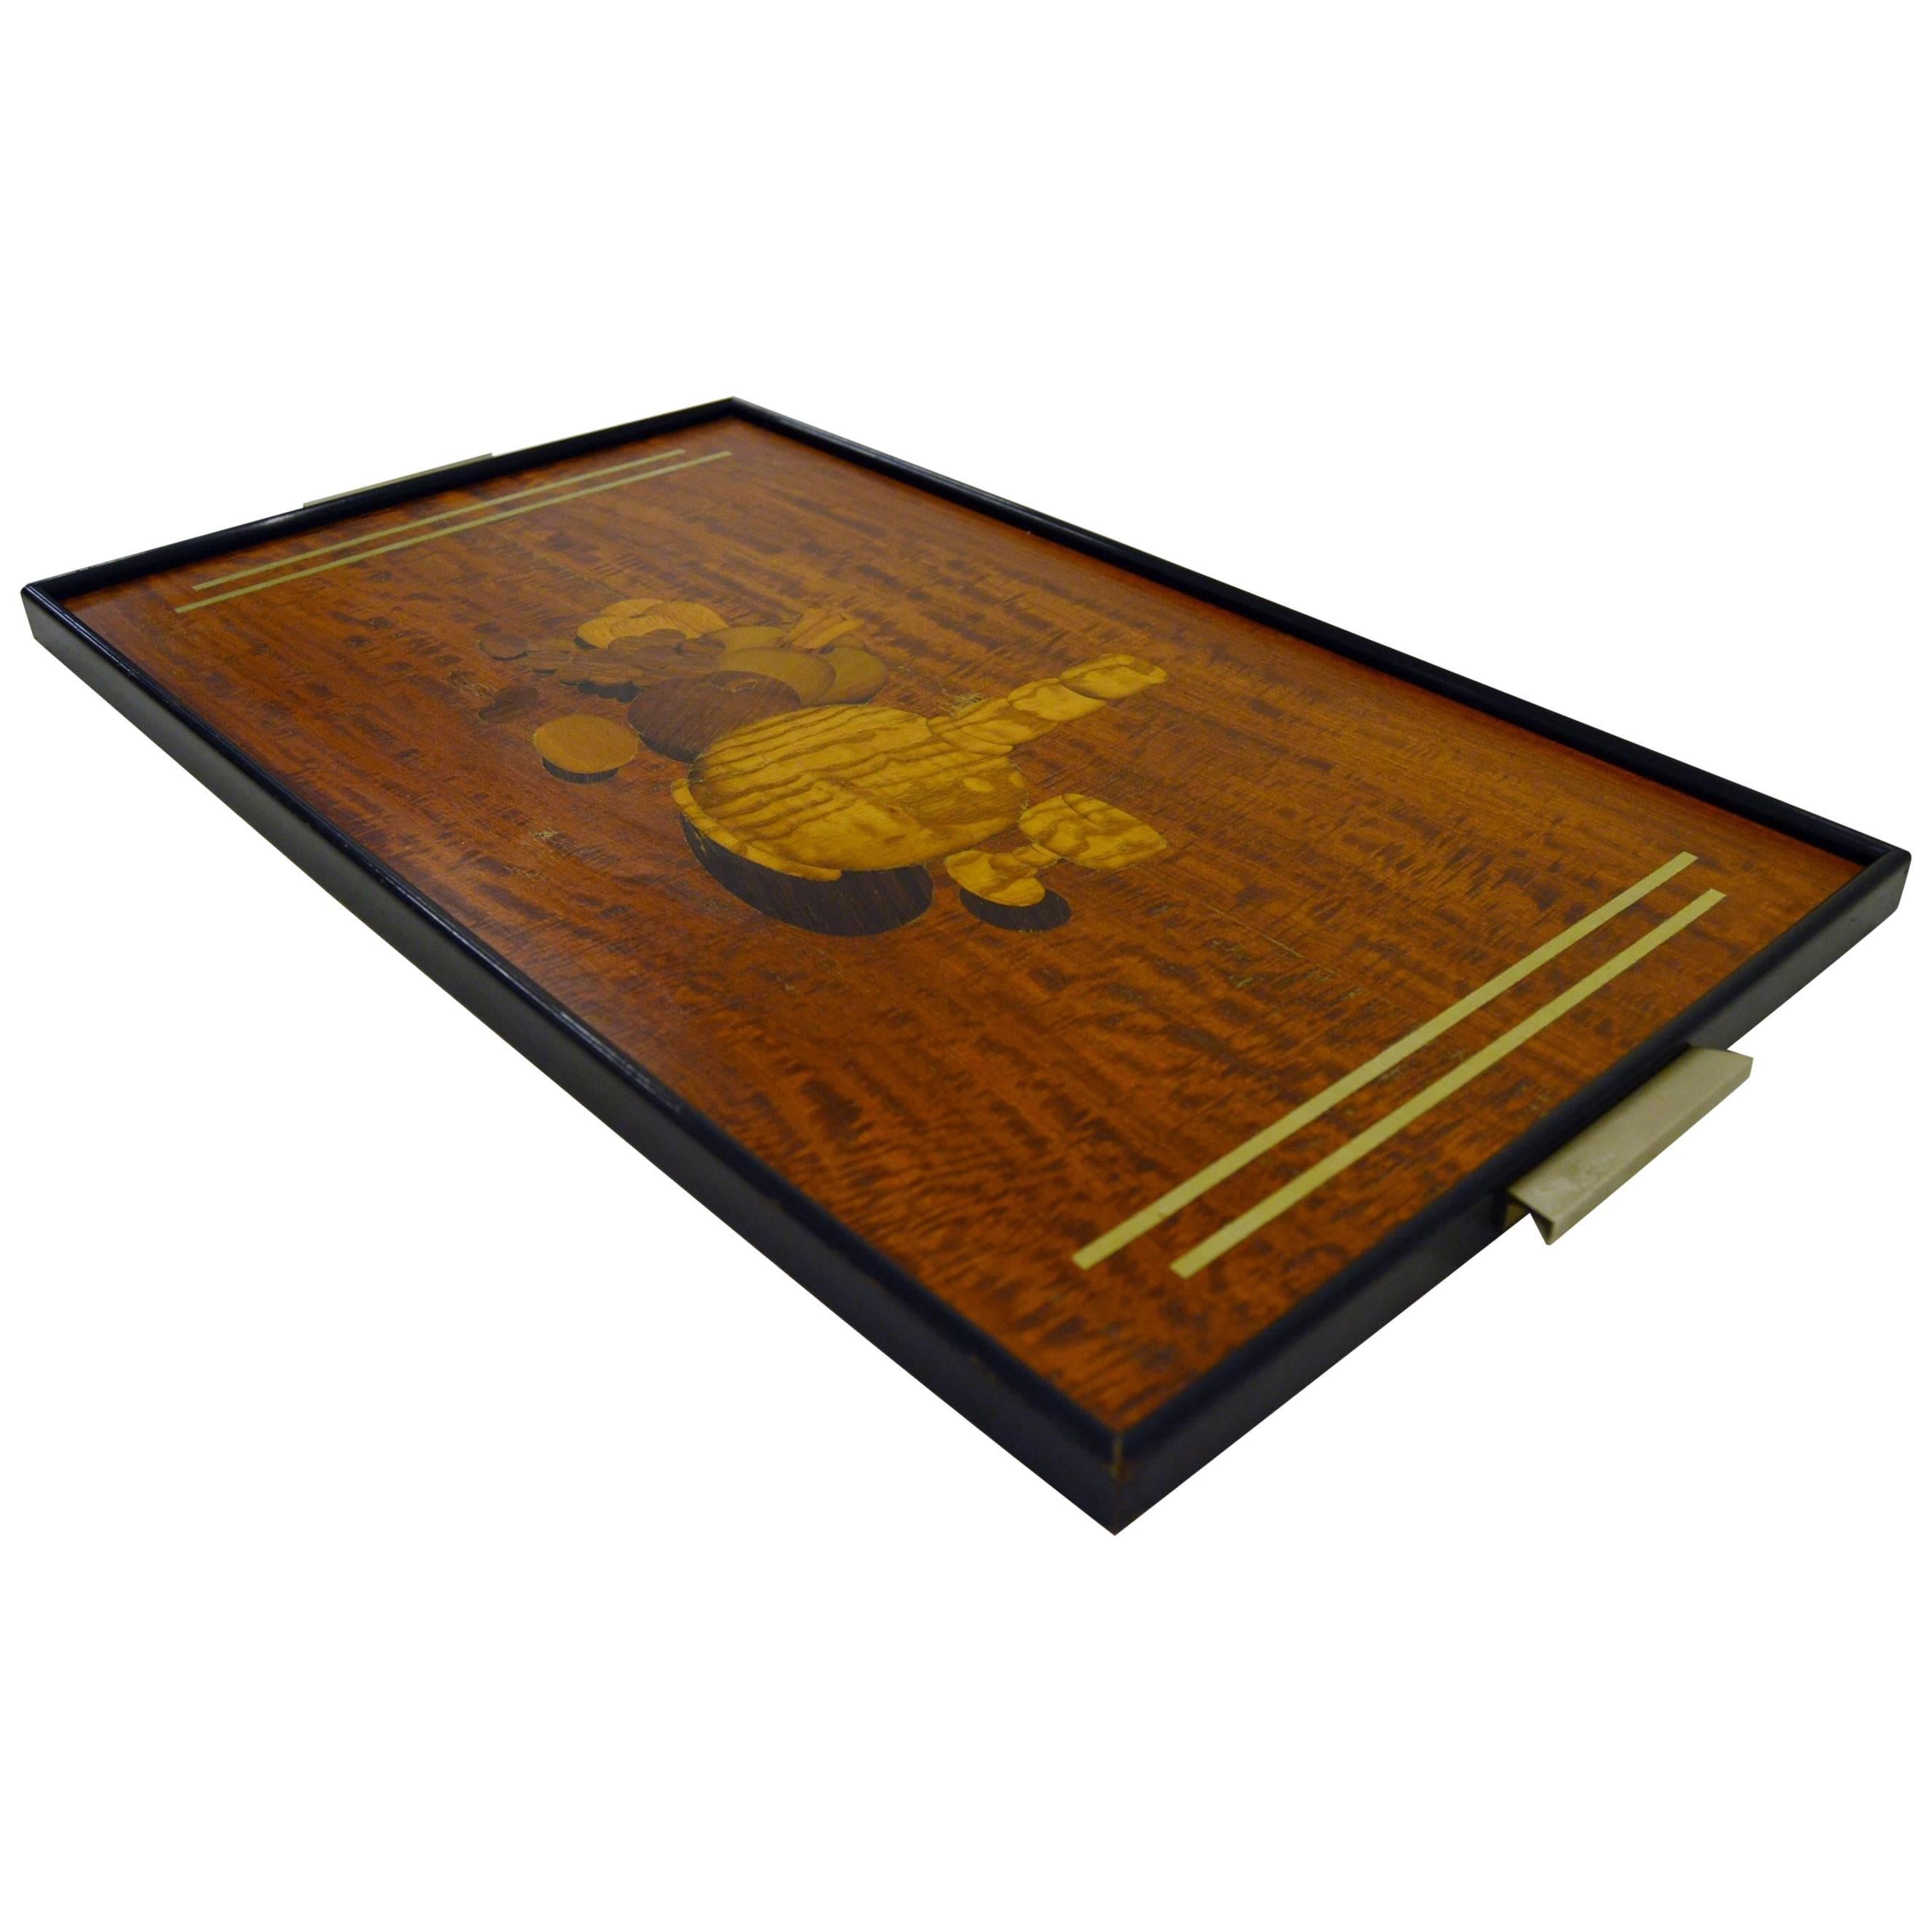 Bar Serving Tray with Inlays from Mölby Intarsia, circa 1930s